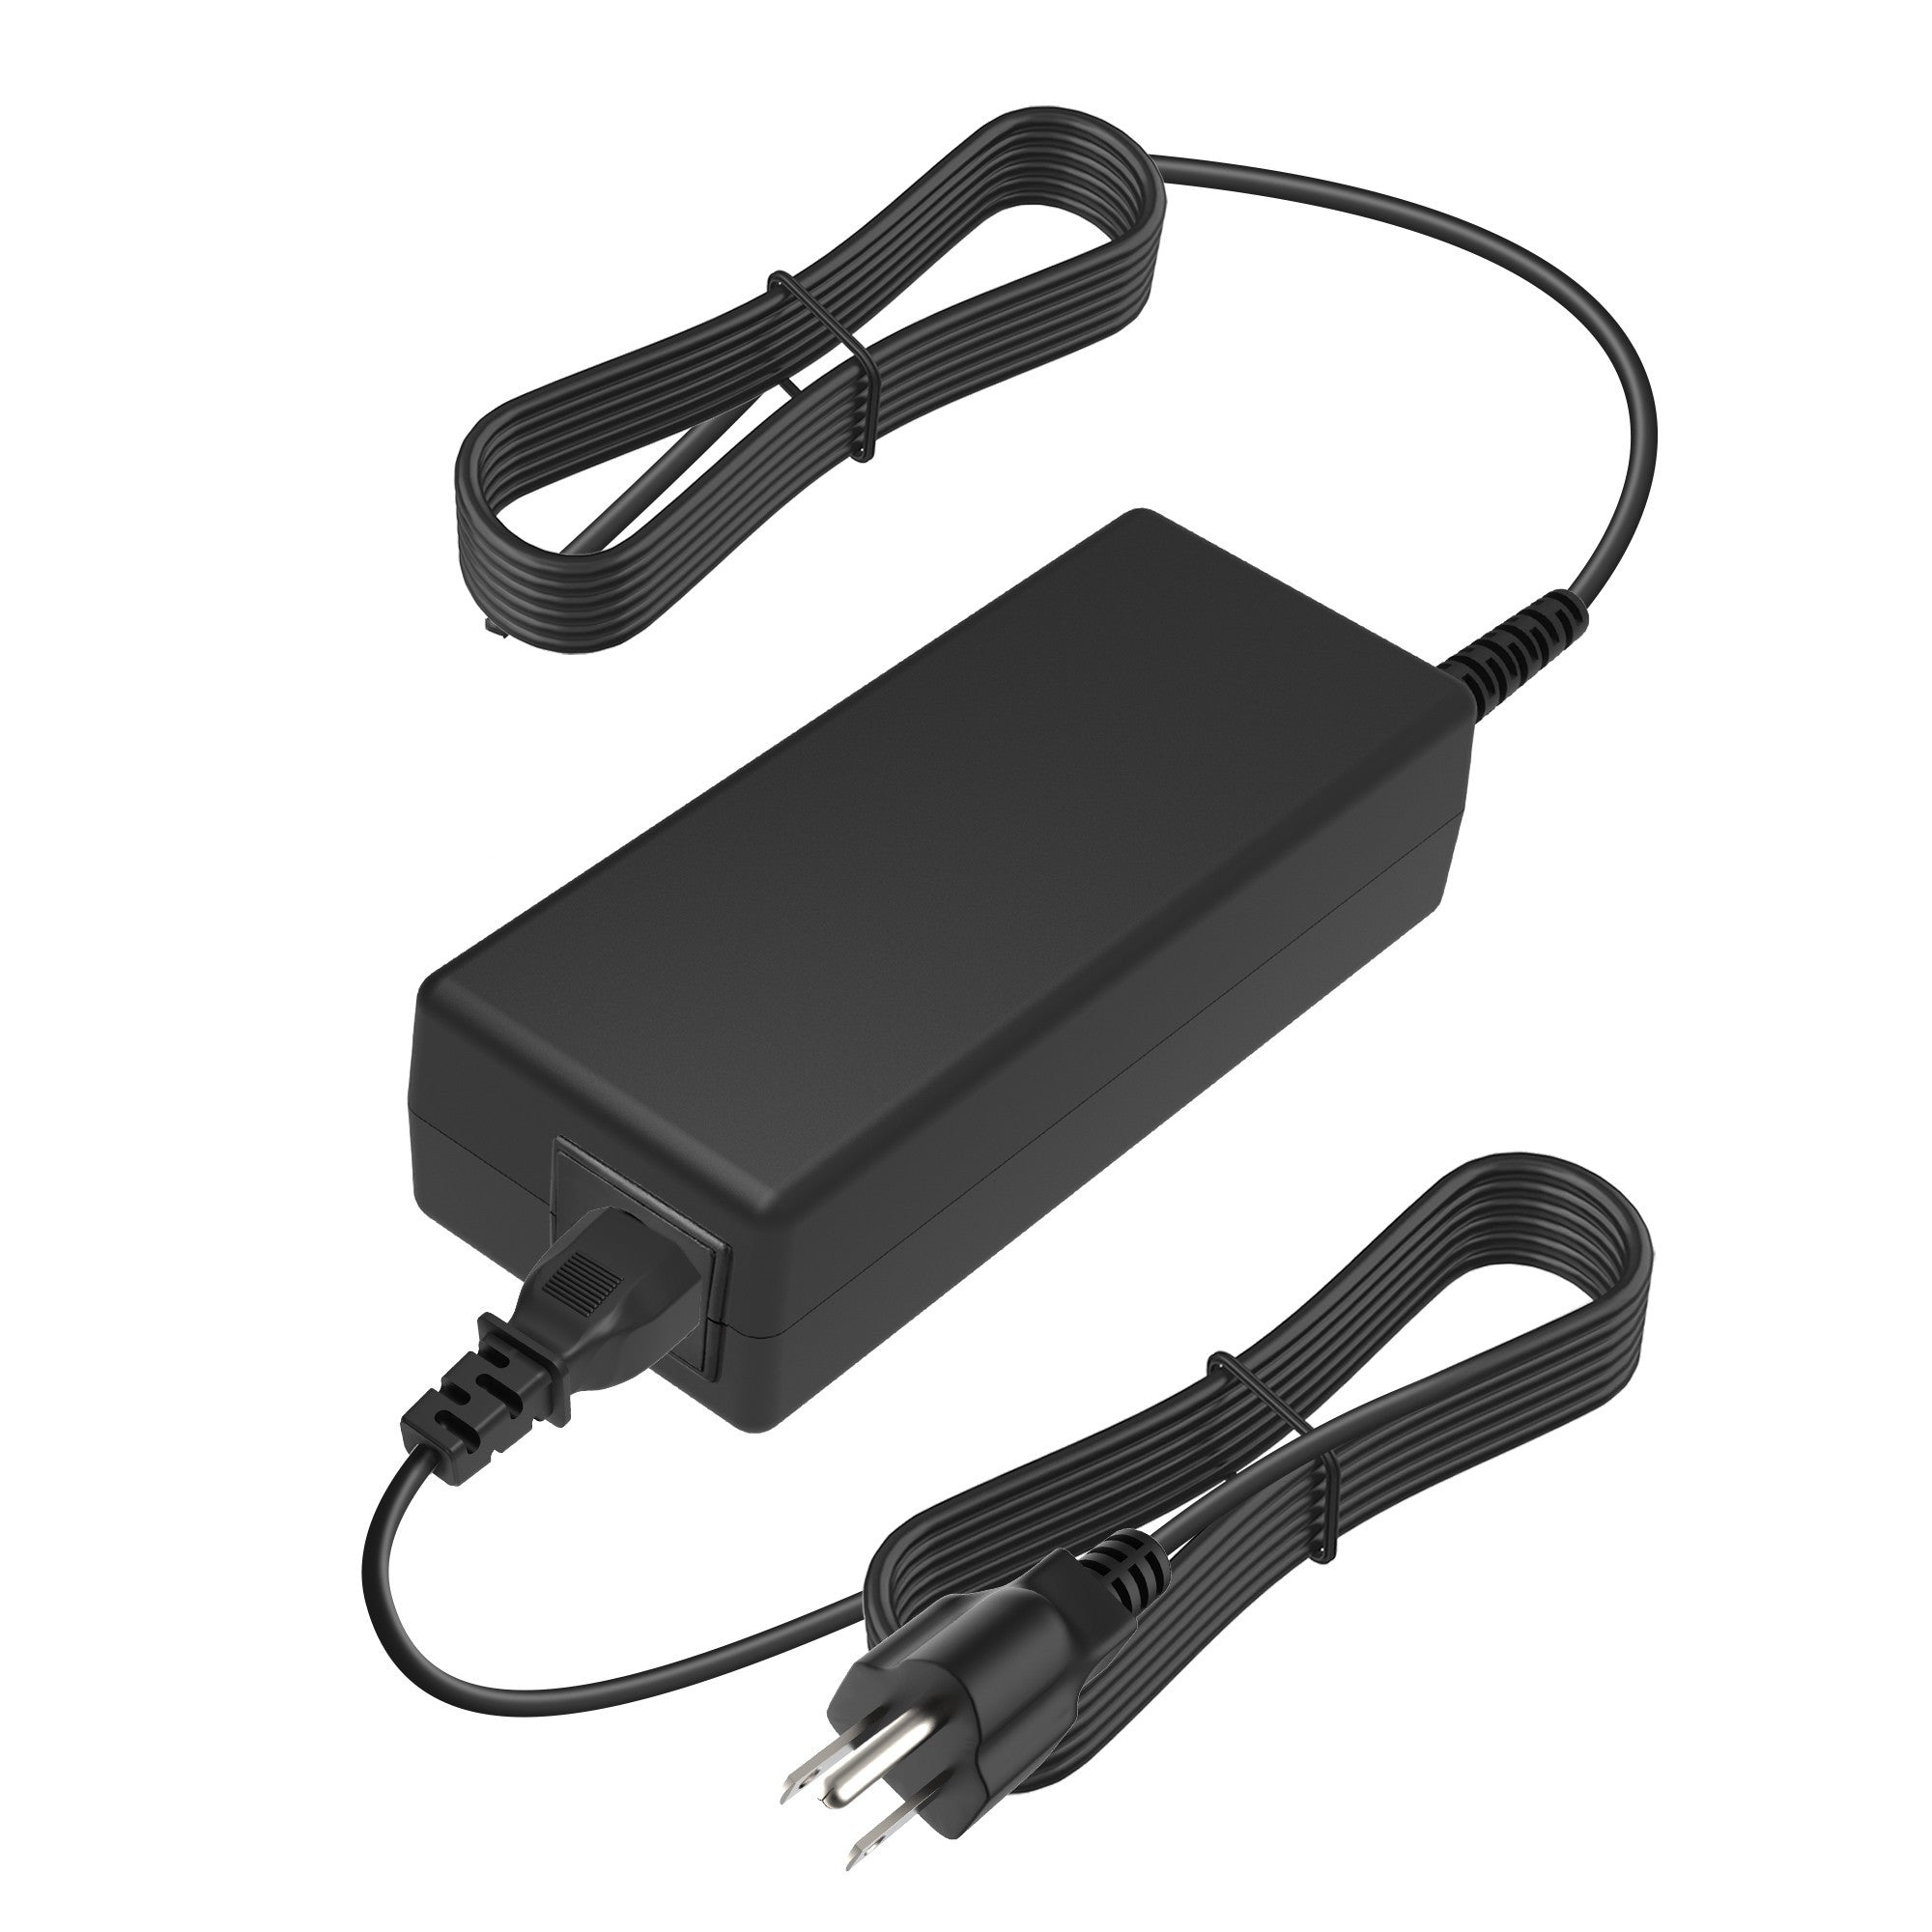 AbleGrid 90W AC DC Adapter Compatible with HP Pavilion G72-B15EV G72-b15SA G72-B15SV G56-126NR 5330m G72-252US G72-253NR G72-A10SA G72-A35SF g71-442nr G71-358NR